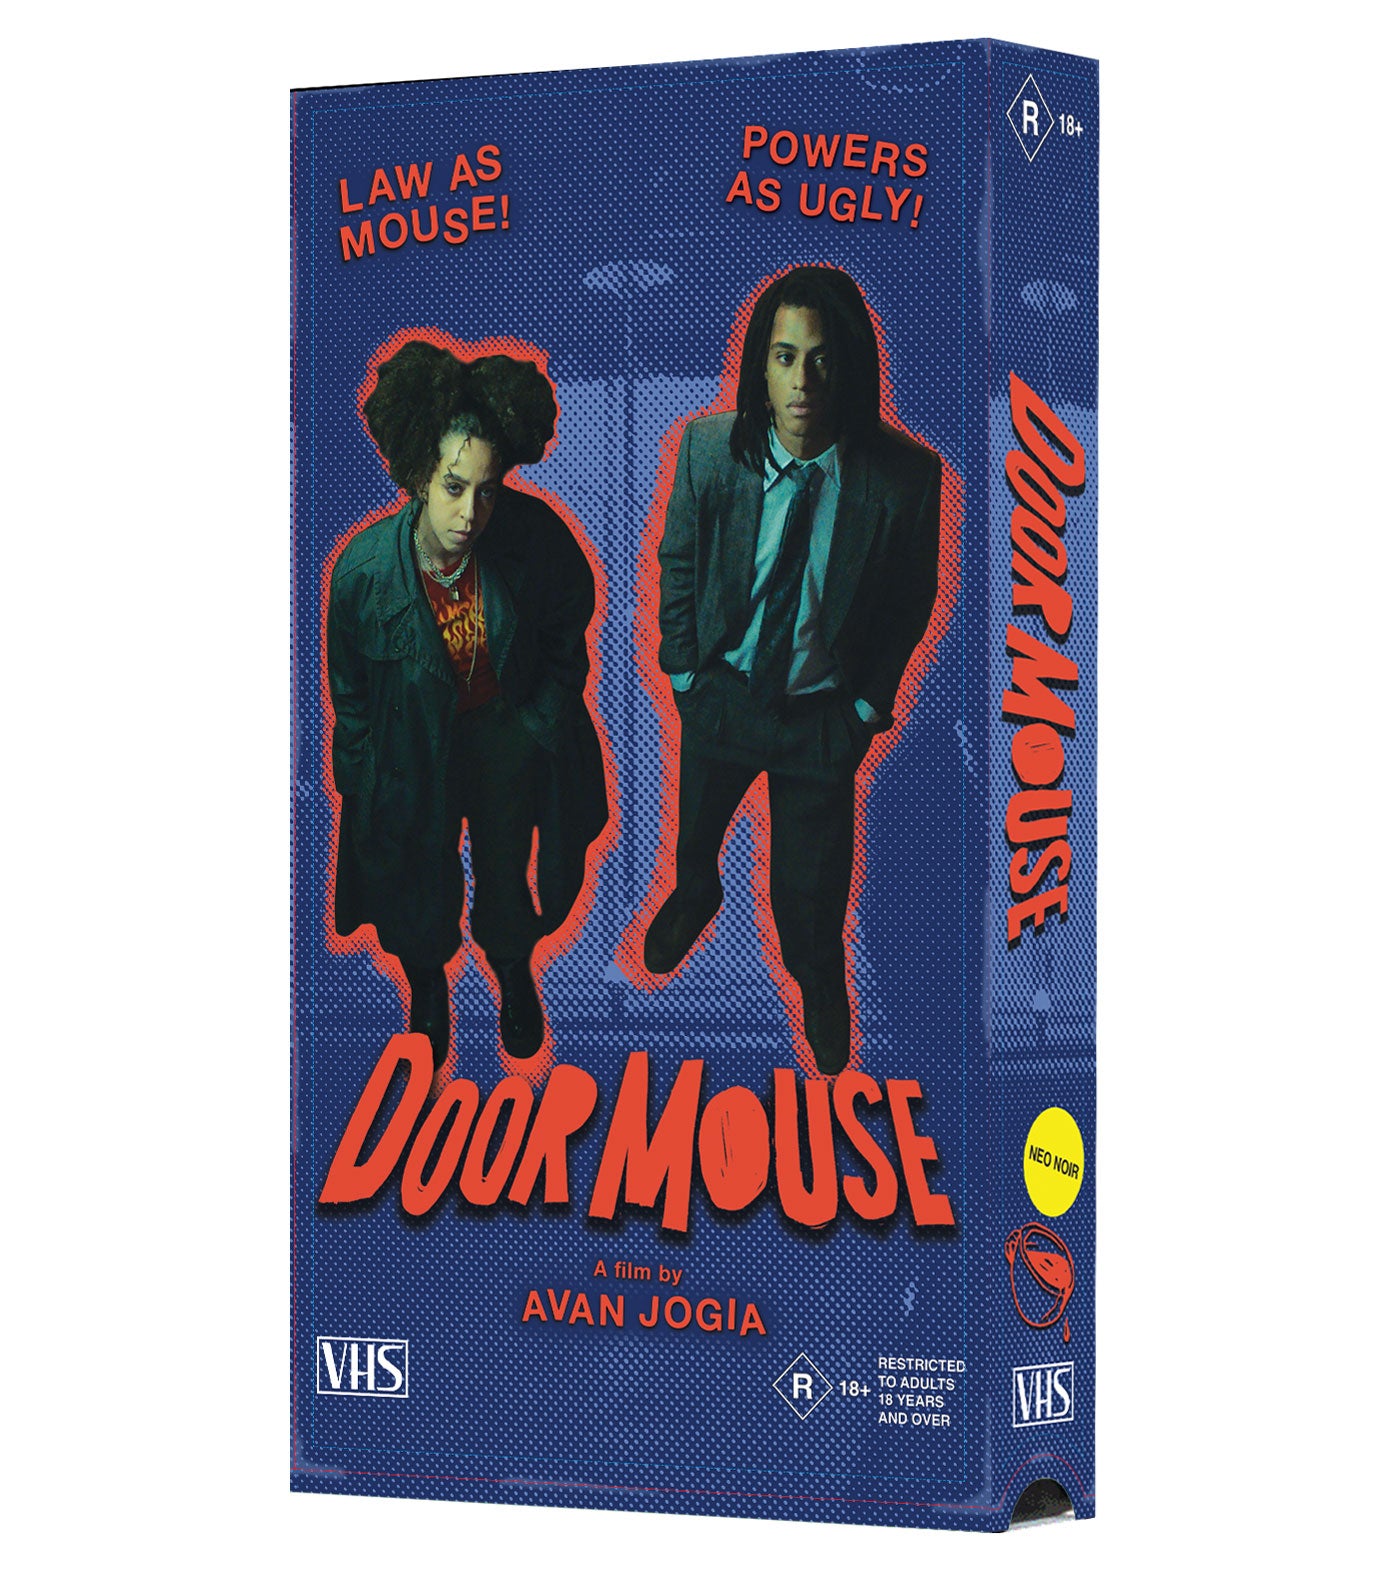 DOOR MOUSE - VHS Tape